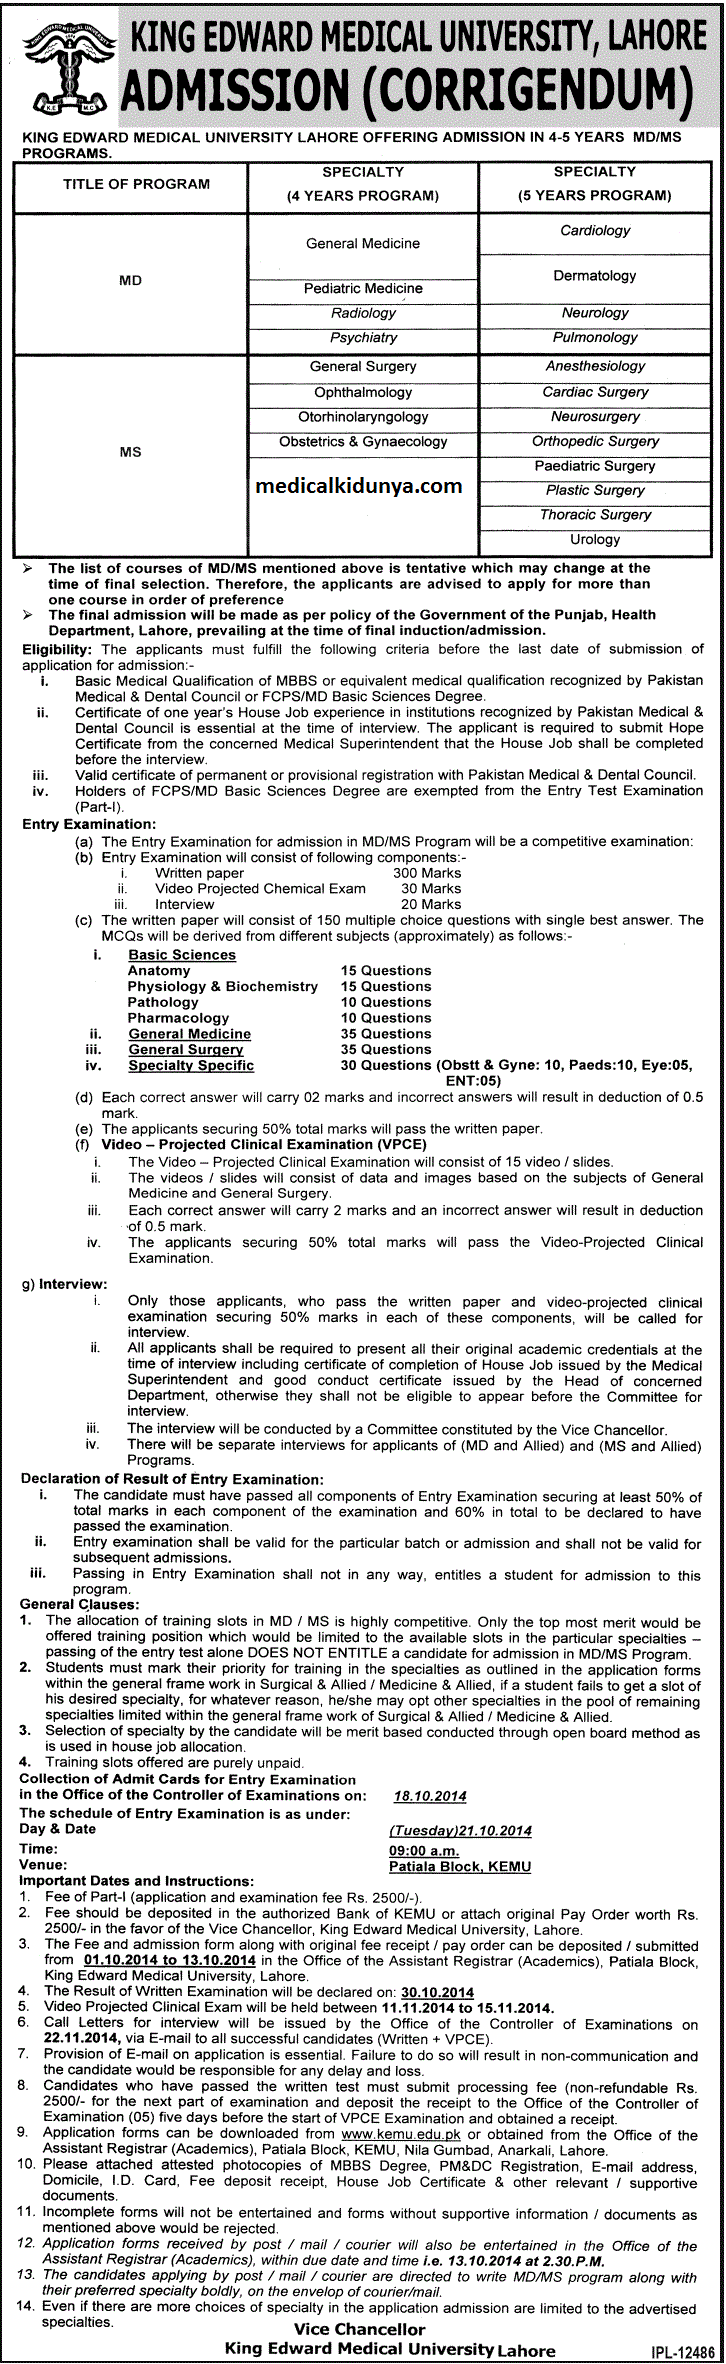 King Edward Medical University (KEMU) Lahore Offering Admission in 4-5 Years MD / MS Programs 2014